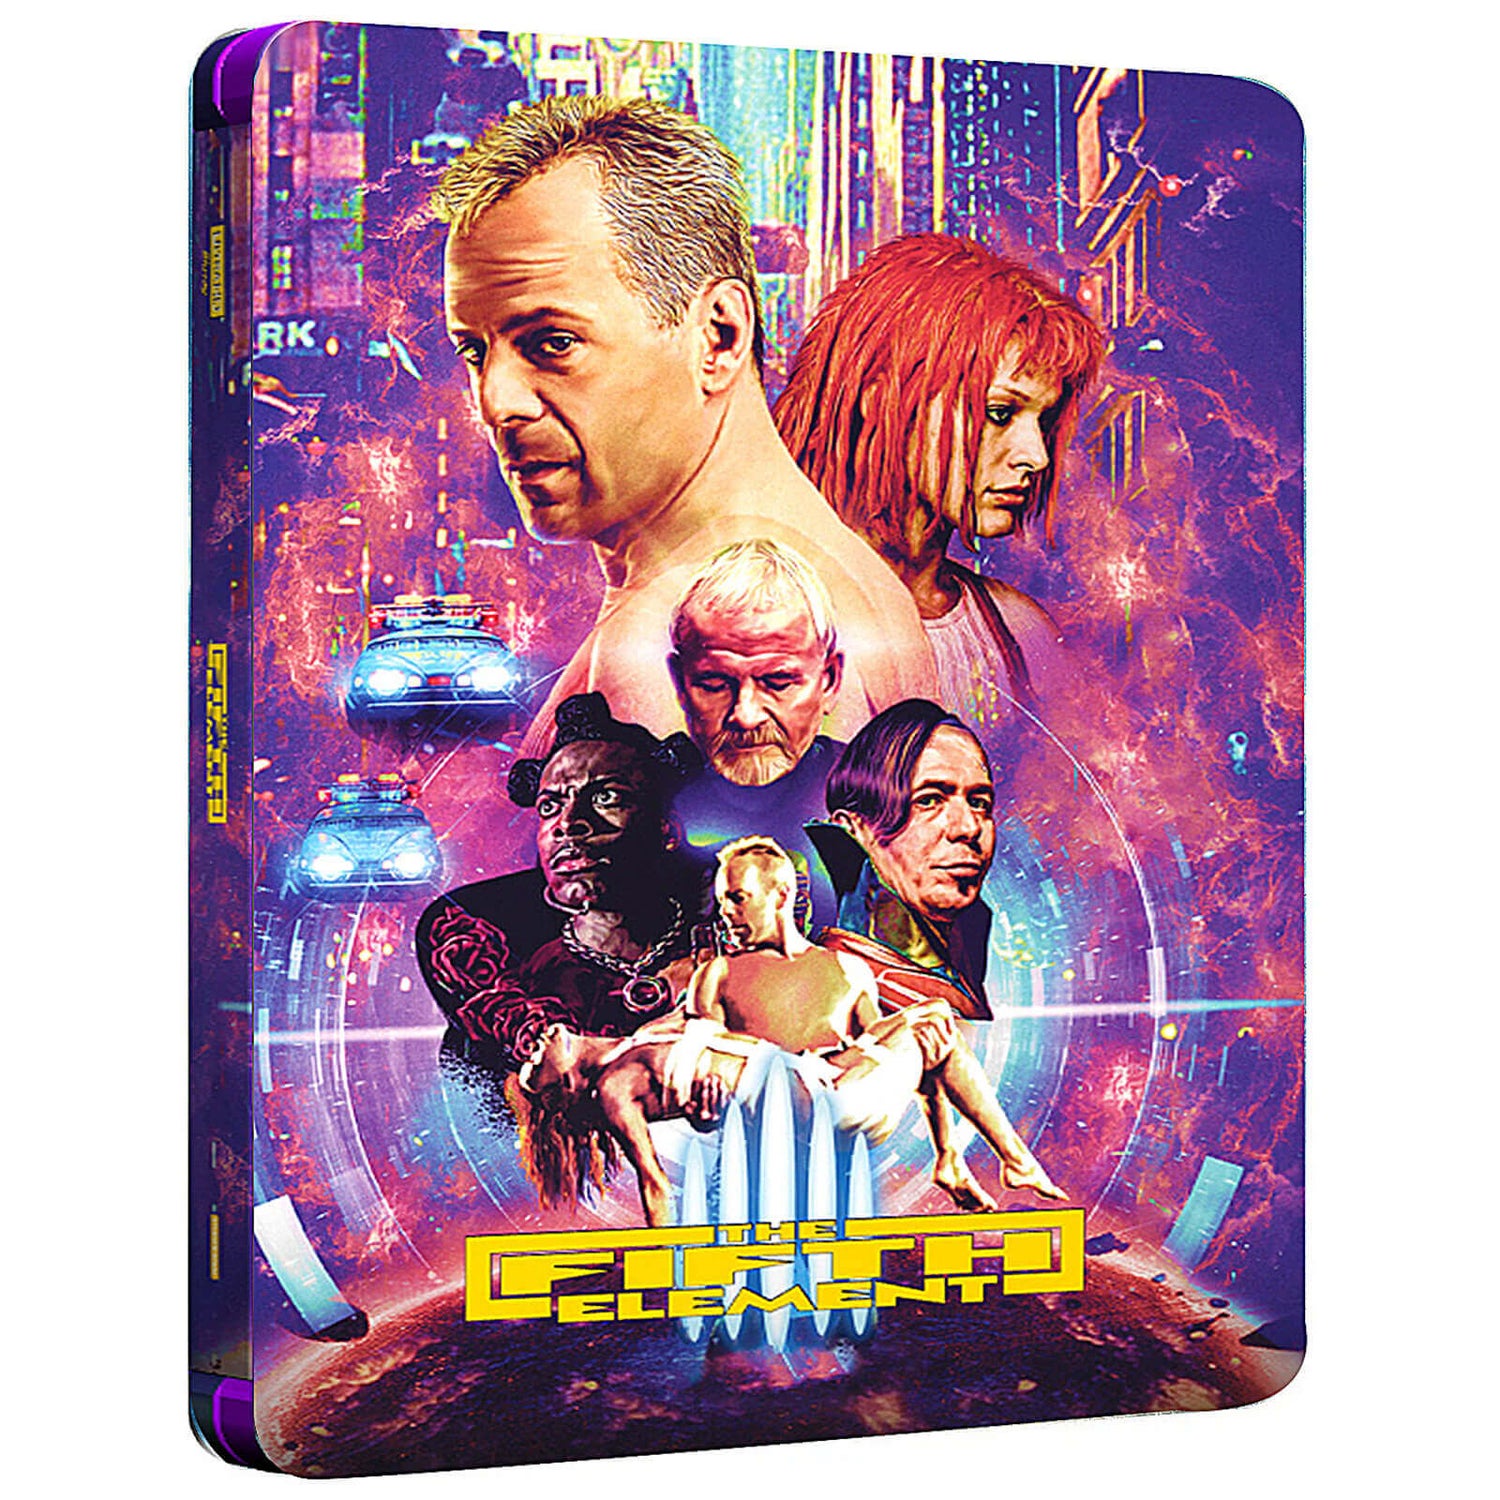 The Fifth Element Zavvi Exclusive Limited Edition 4K Ultra HD Steelbook (includes Blu-ray)